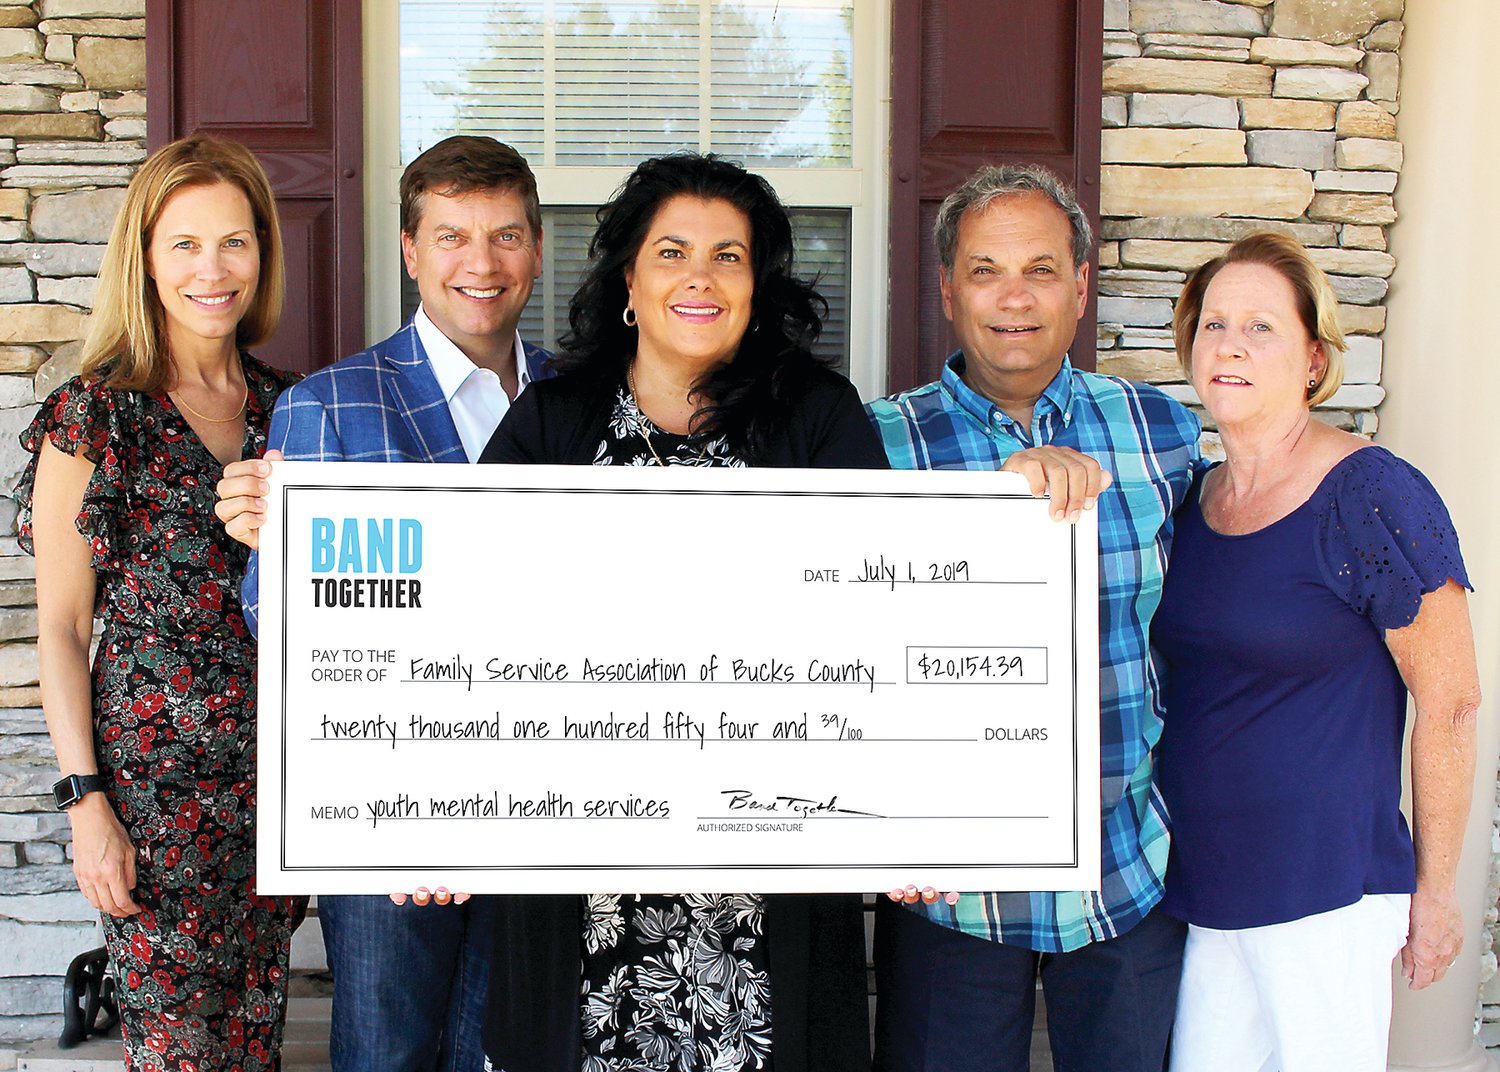 Heidi Hubert and Jeff Perkins; Dina Della Ducata, Family Service CEO; and Cliff and Linda Davis at a check presentation at Family Service’s Langhorne office